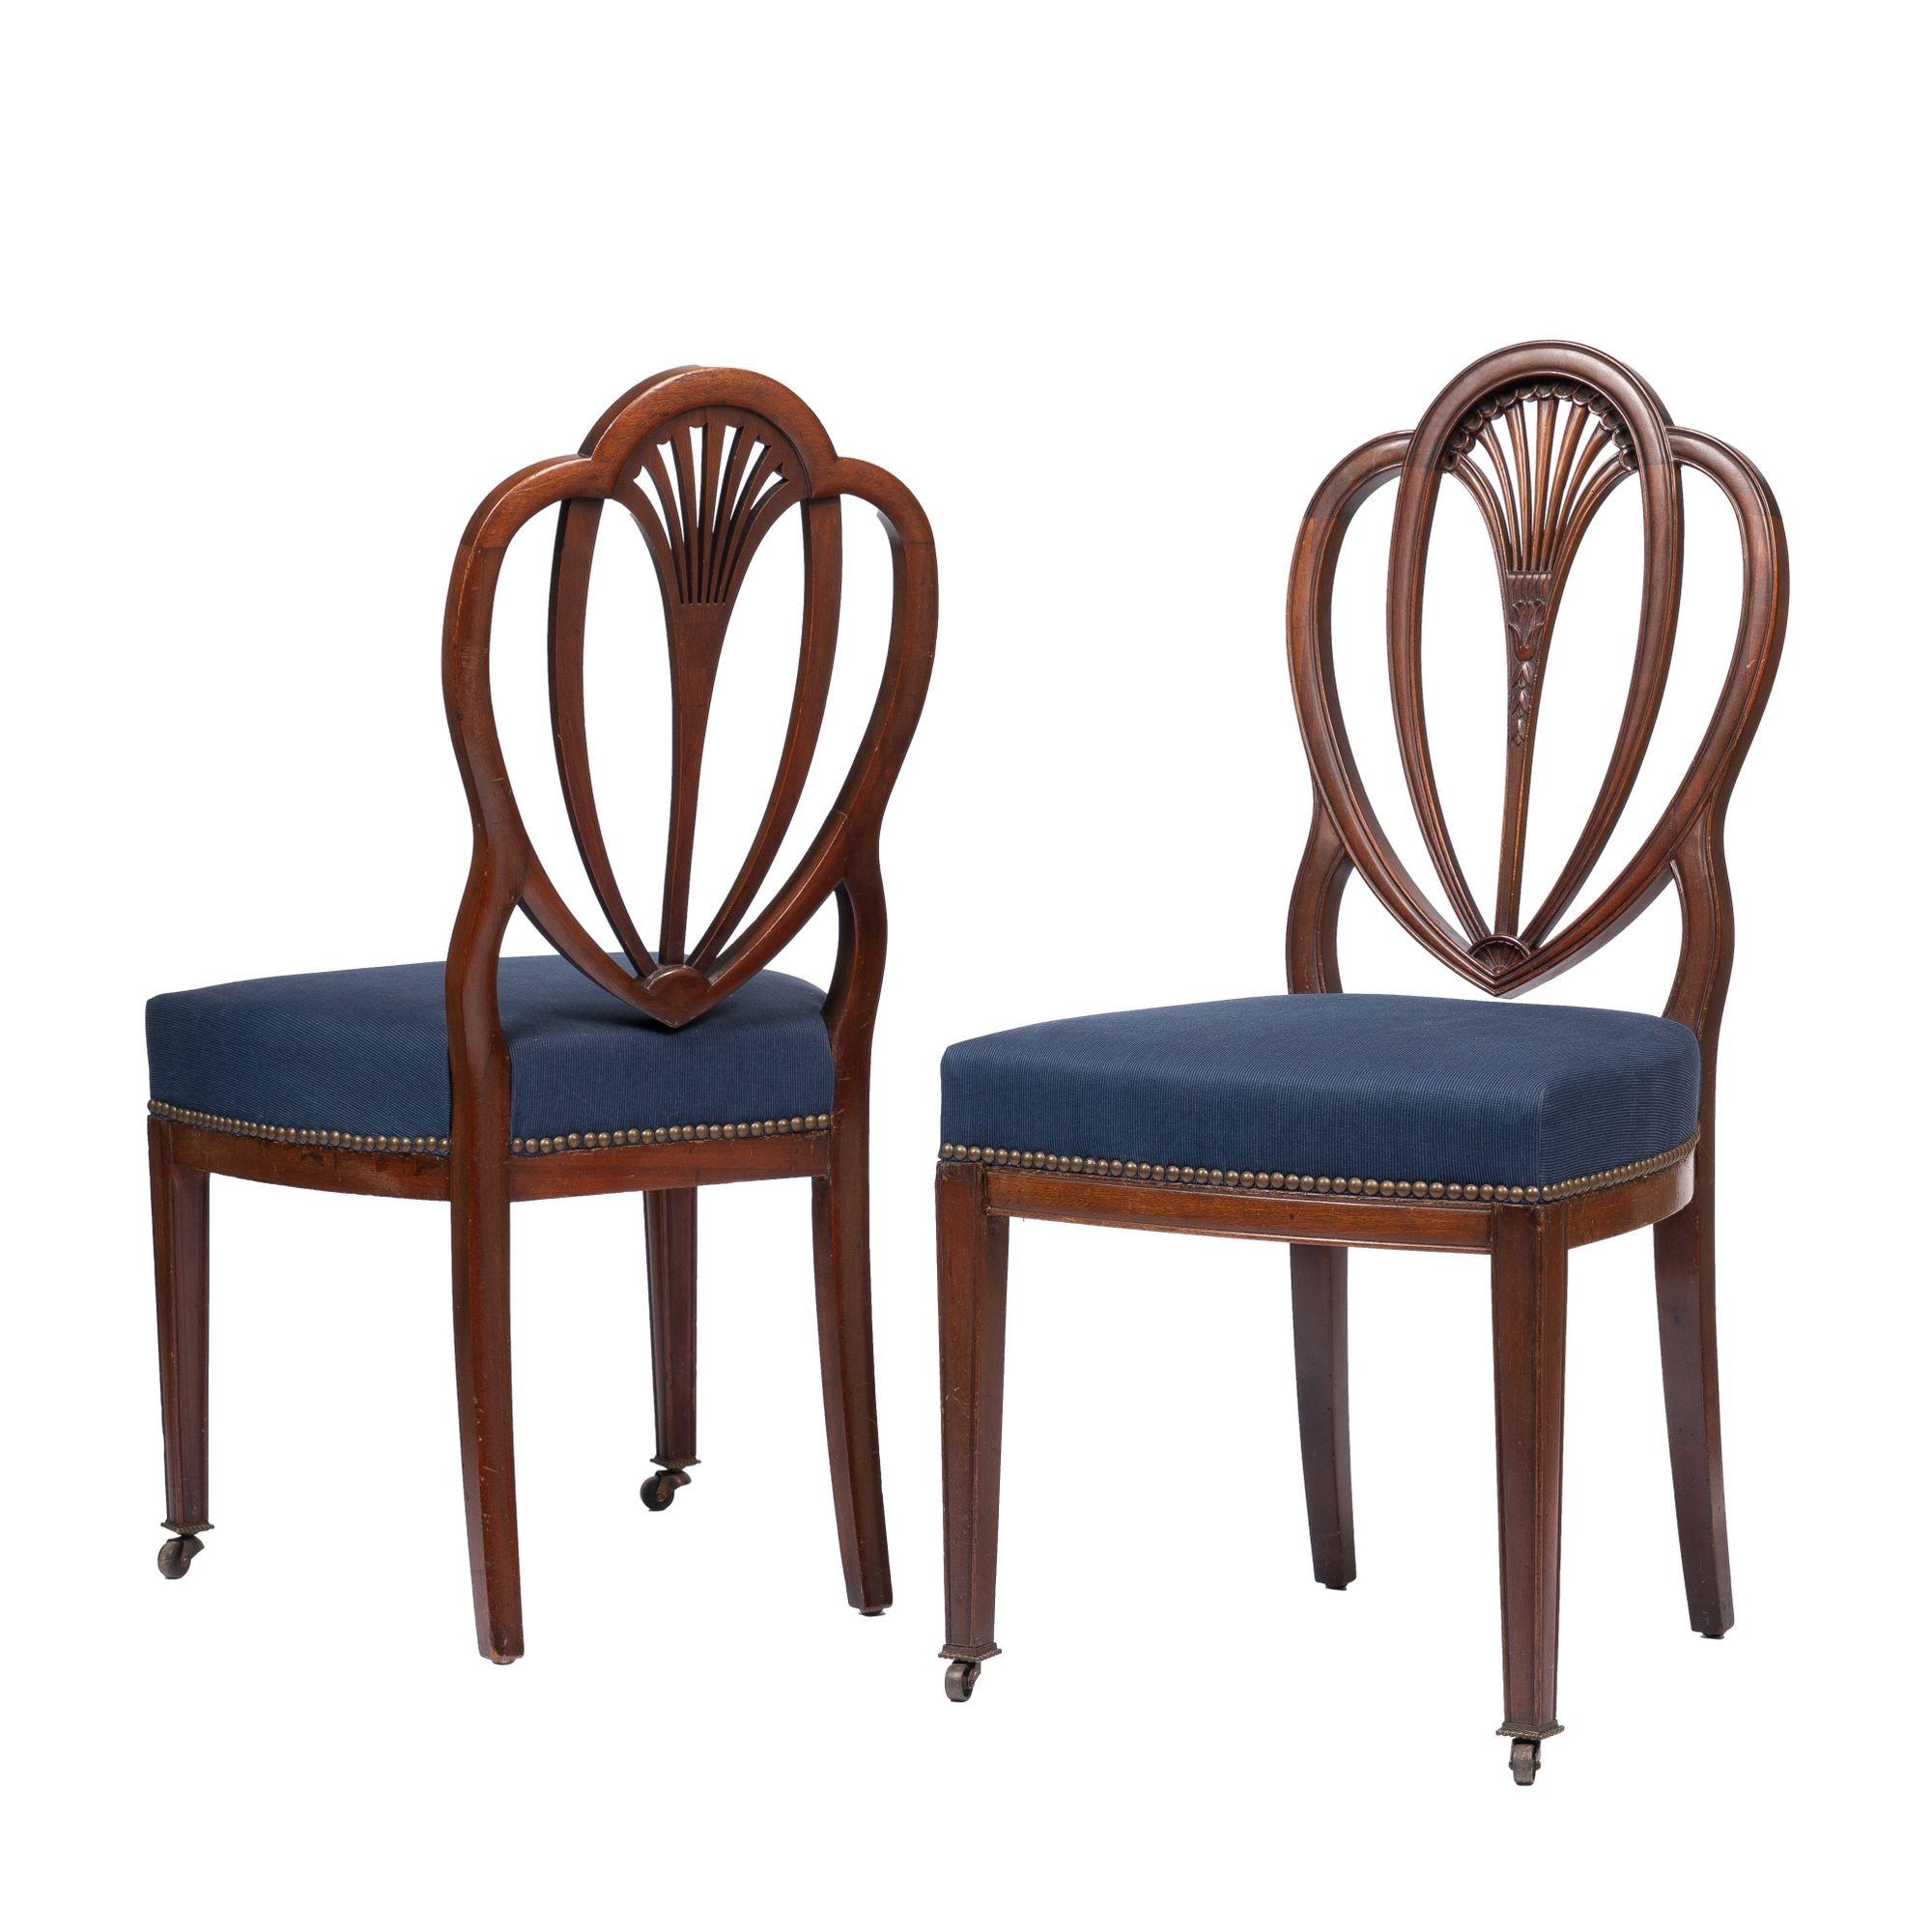 Pair of Academic Revival heart back mahogany side chairs with half rail upholstered boxed seats in indigo fabric with brass nail head tacks. The front legs are fitted with their original cast brass castors with beaded rim cup. Note: one chair is